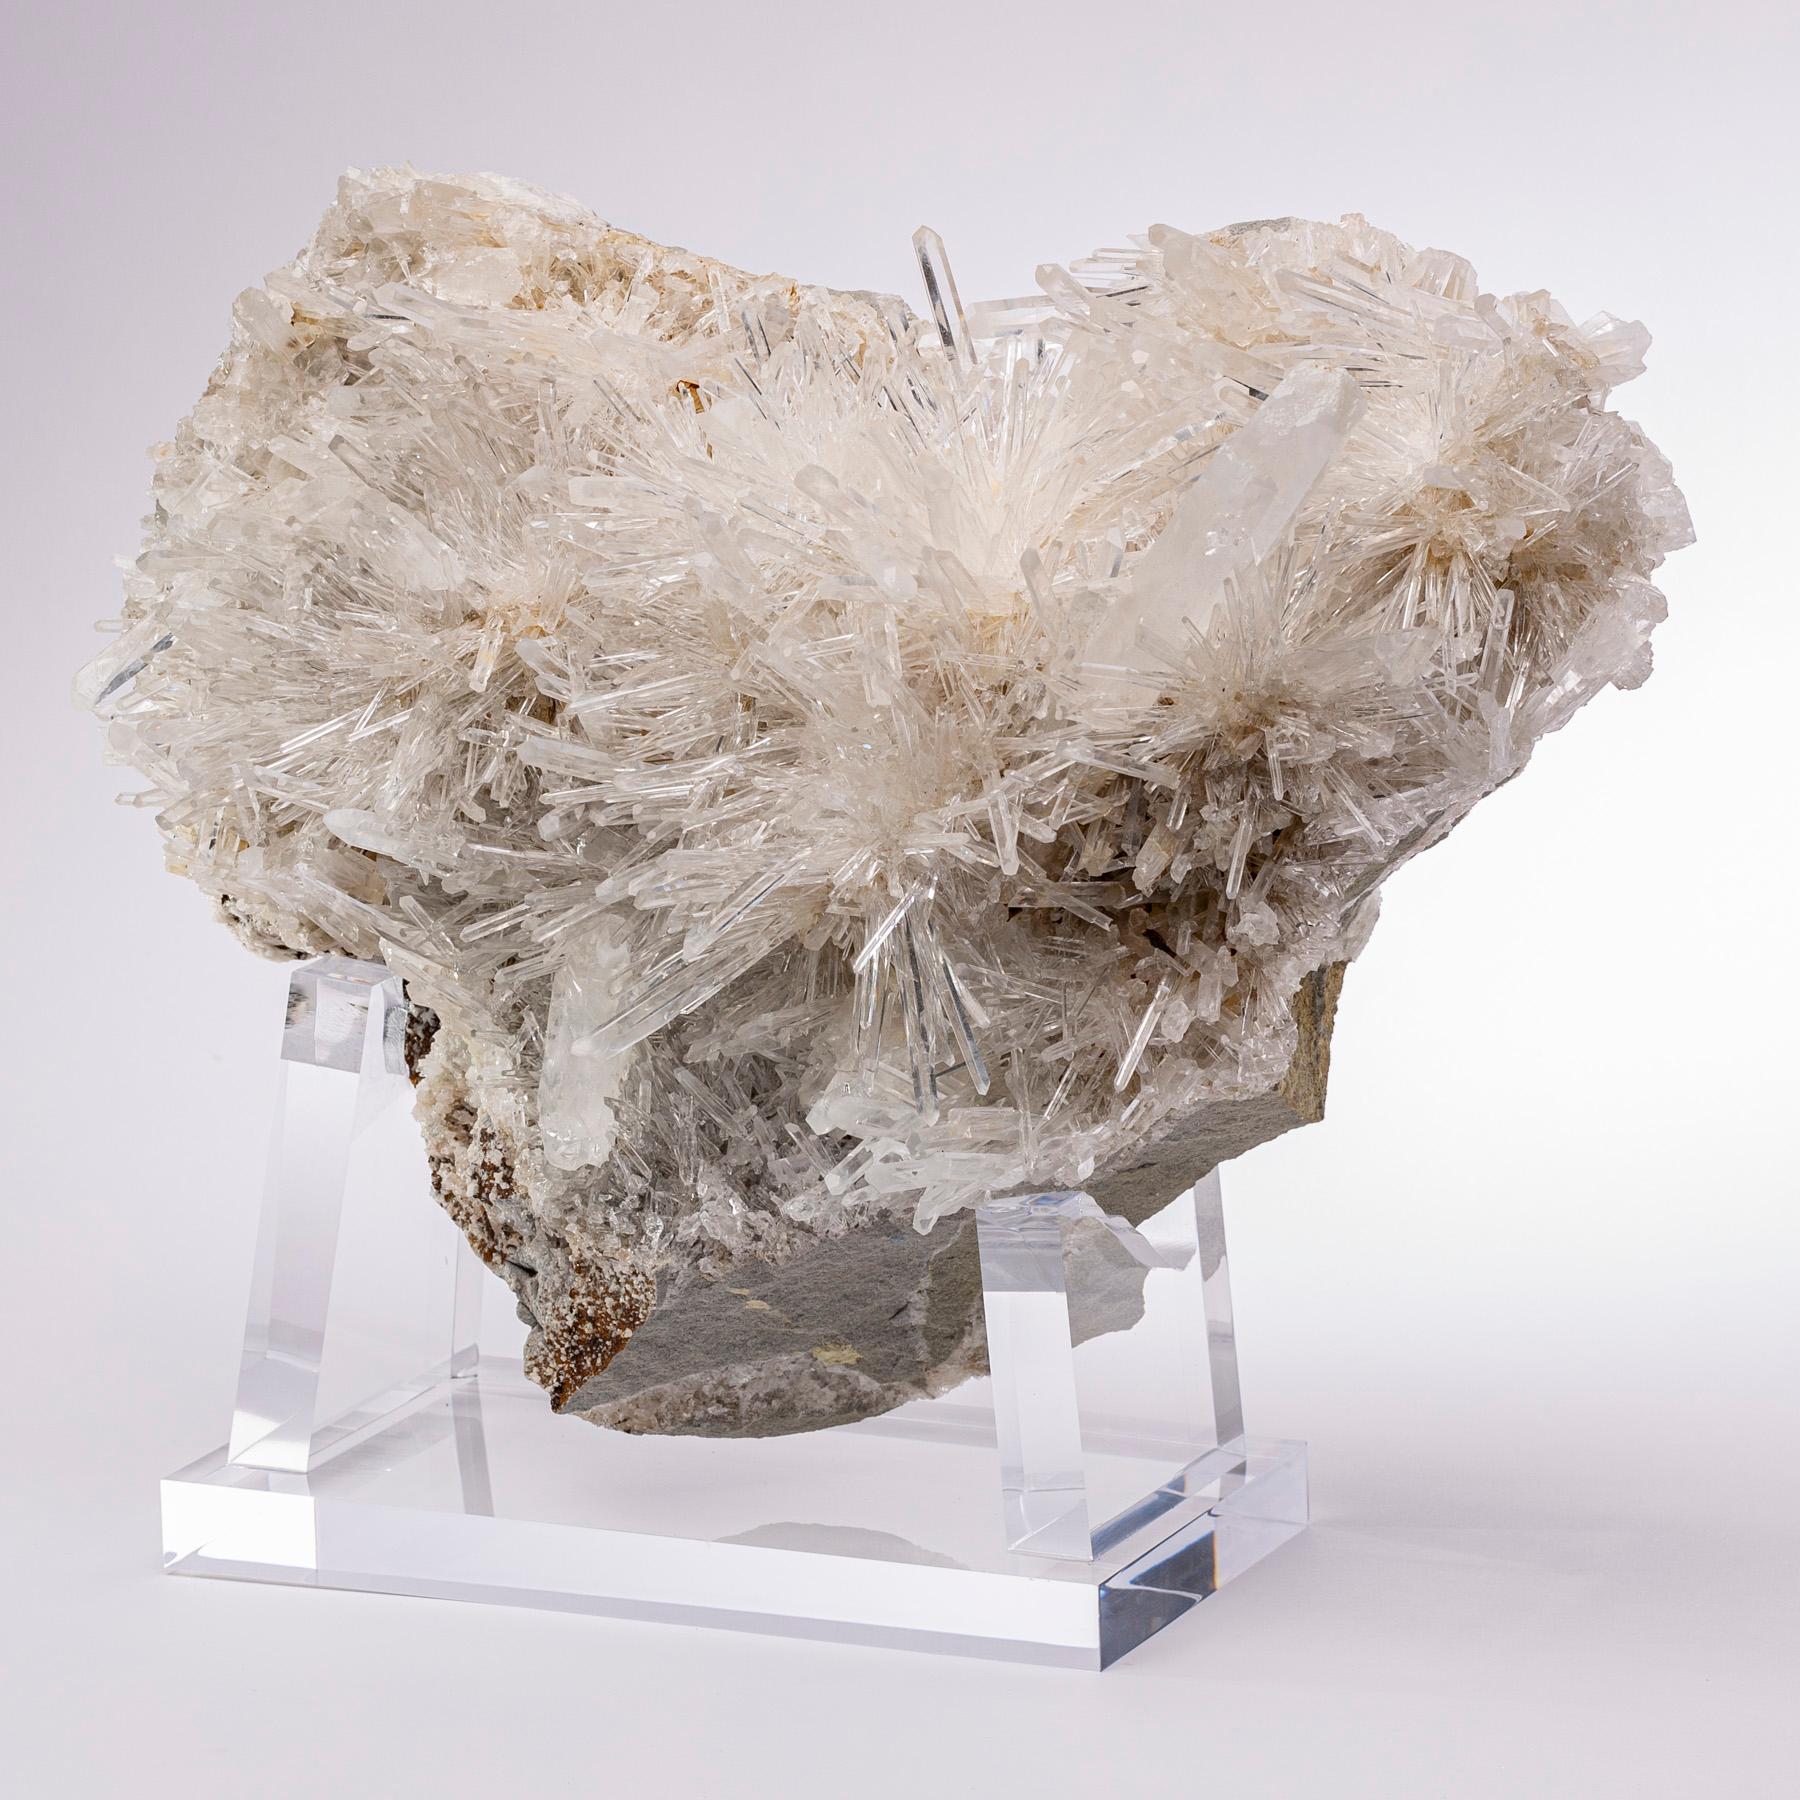 All natural Colombian Quartz Specimen mounted on Acrylic base.